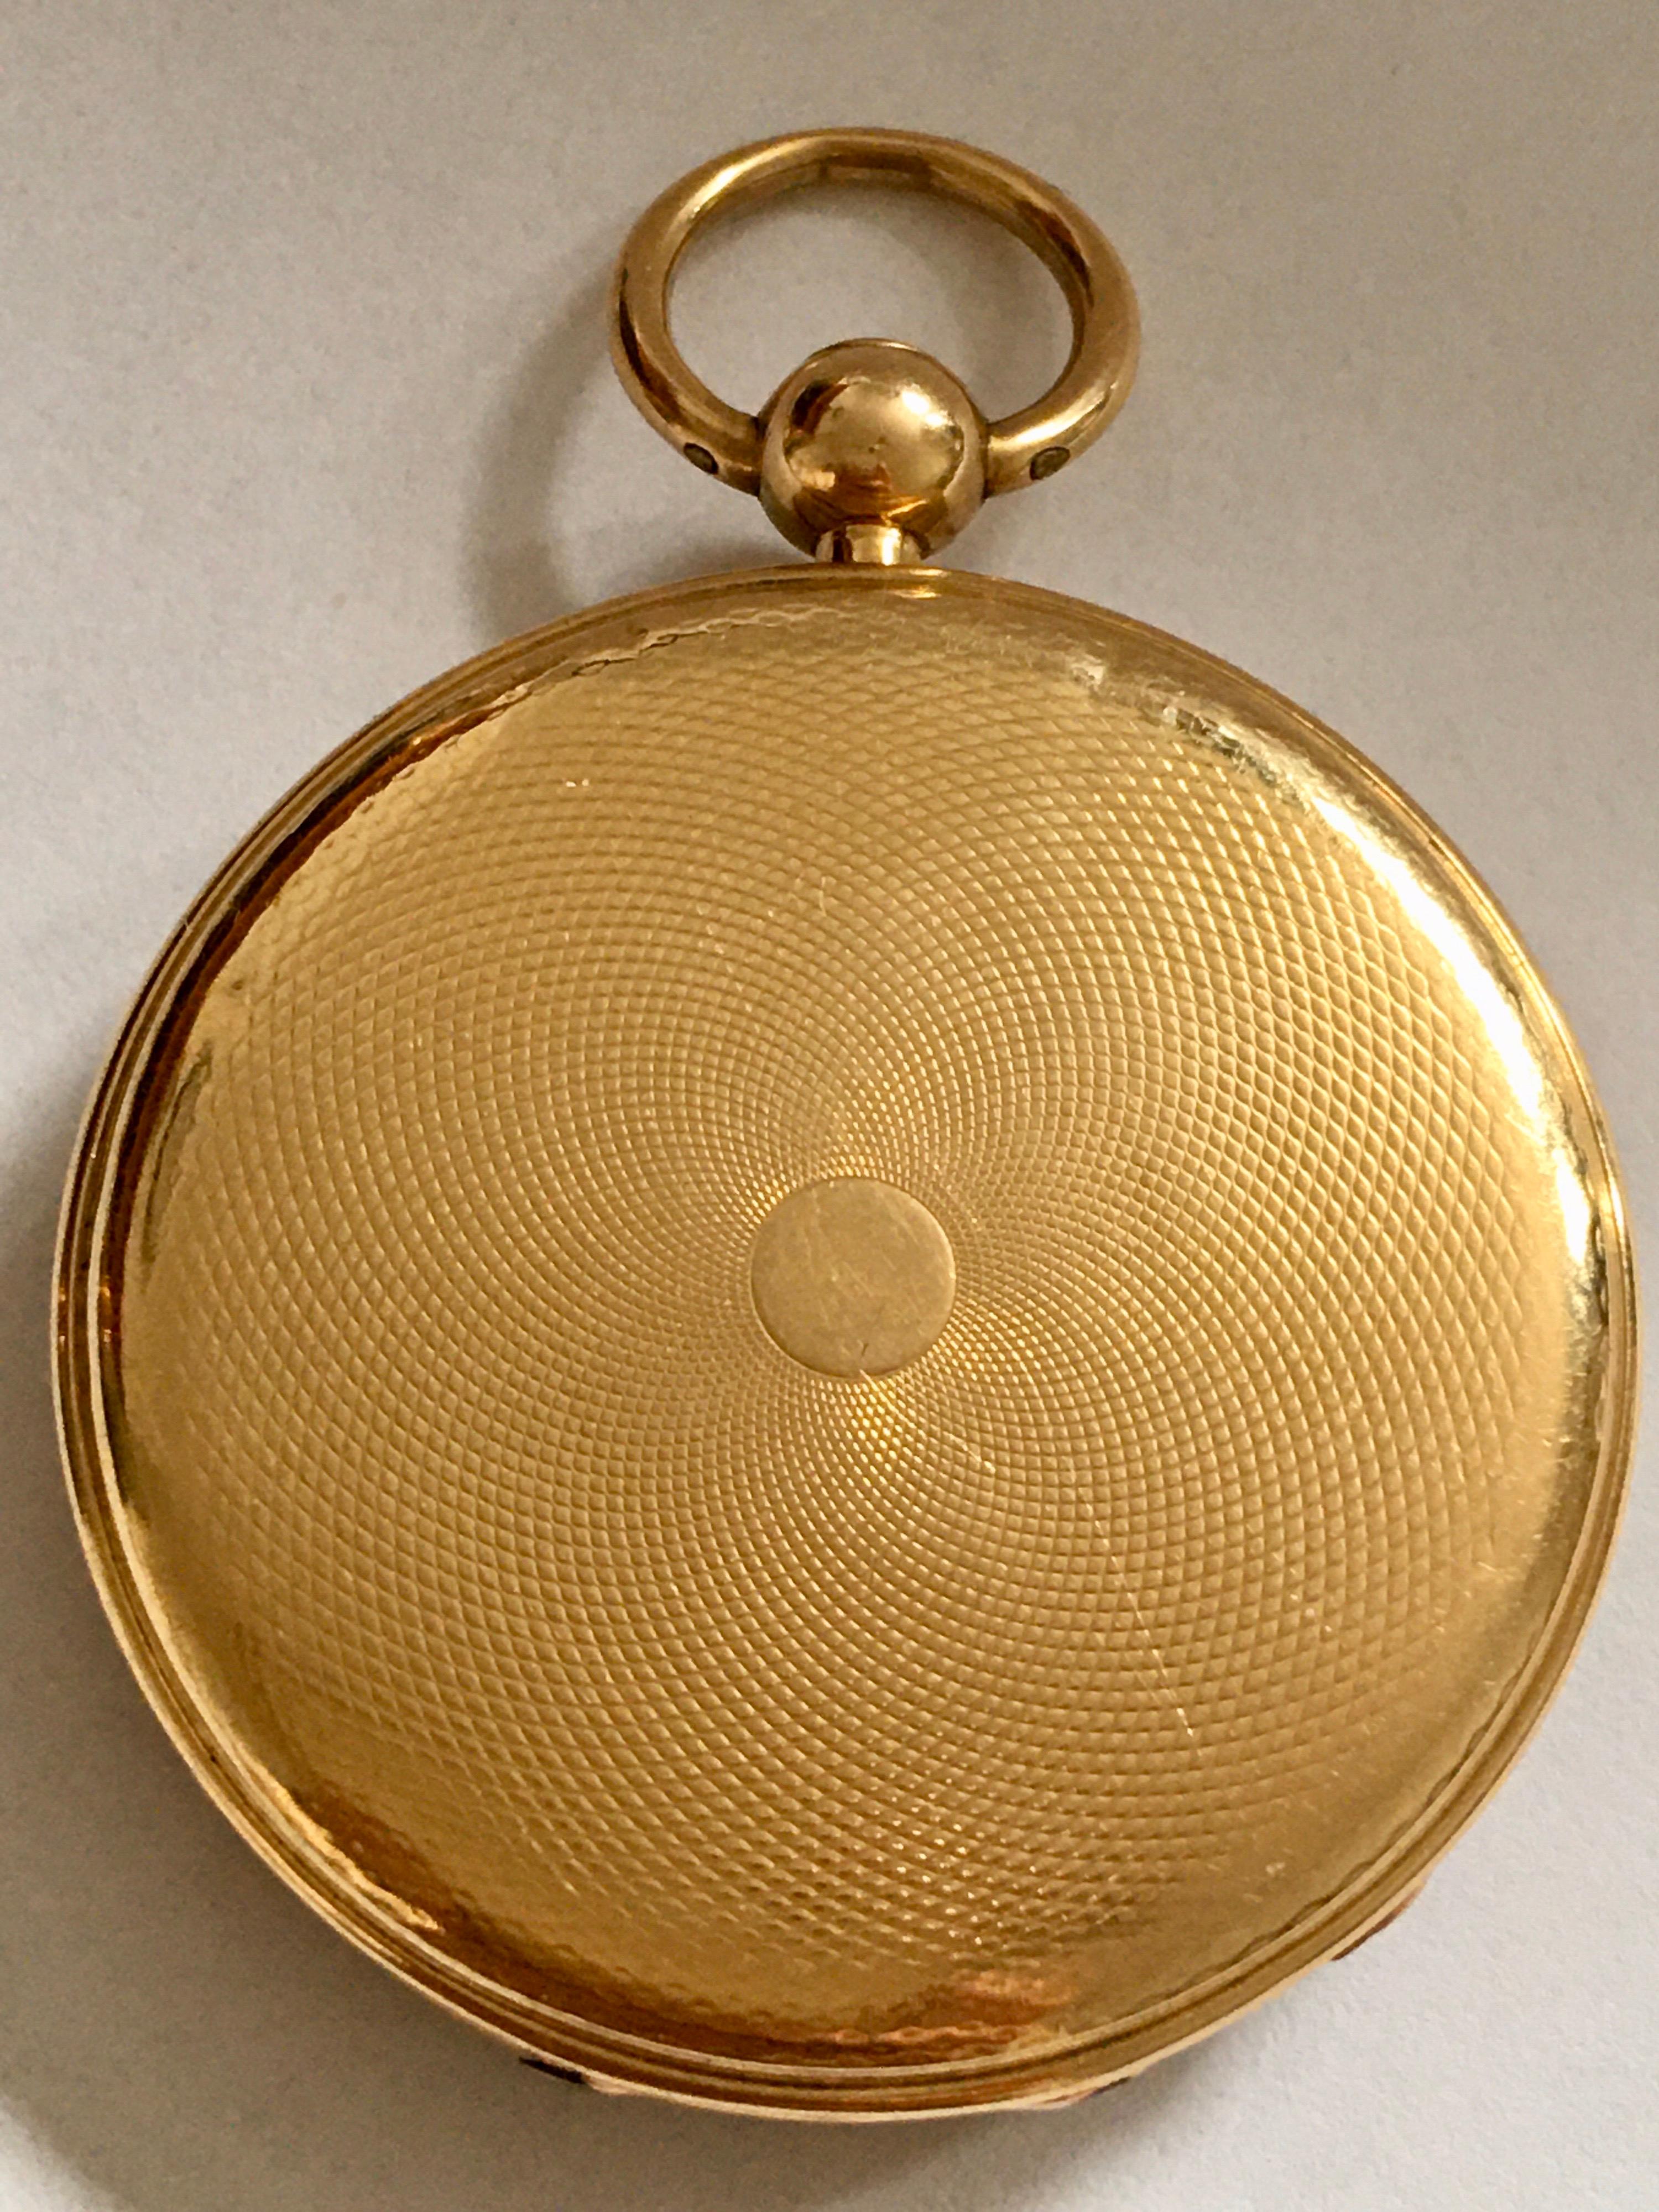 This beautiful and good quality 18K Gold & engines turn cased pocket watch is working and ticking well. The dial is a bit tired but runs well & been serviced. It comes with a winding Key